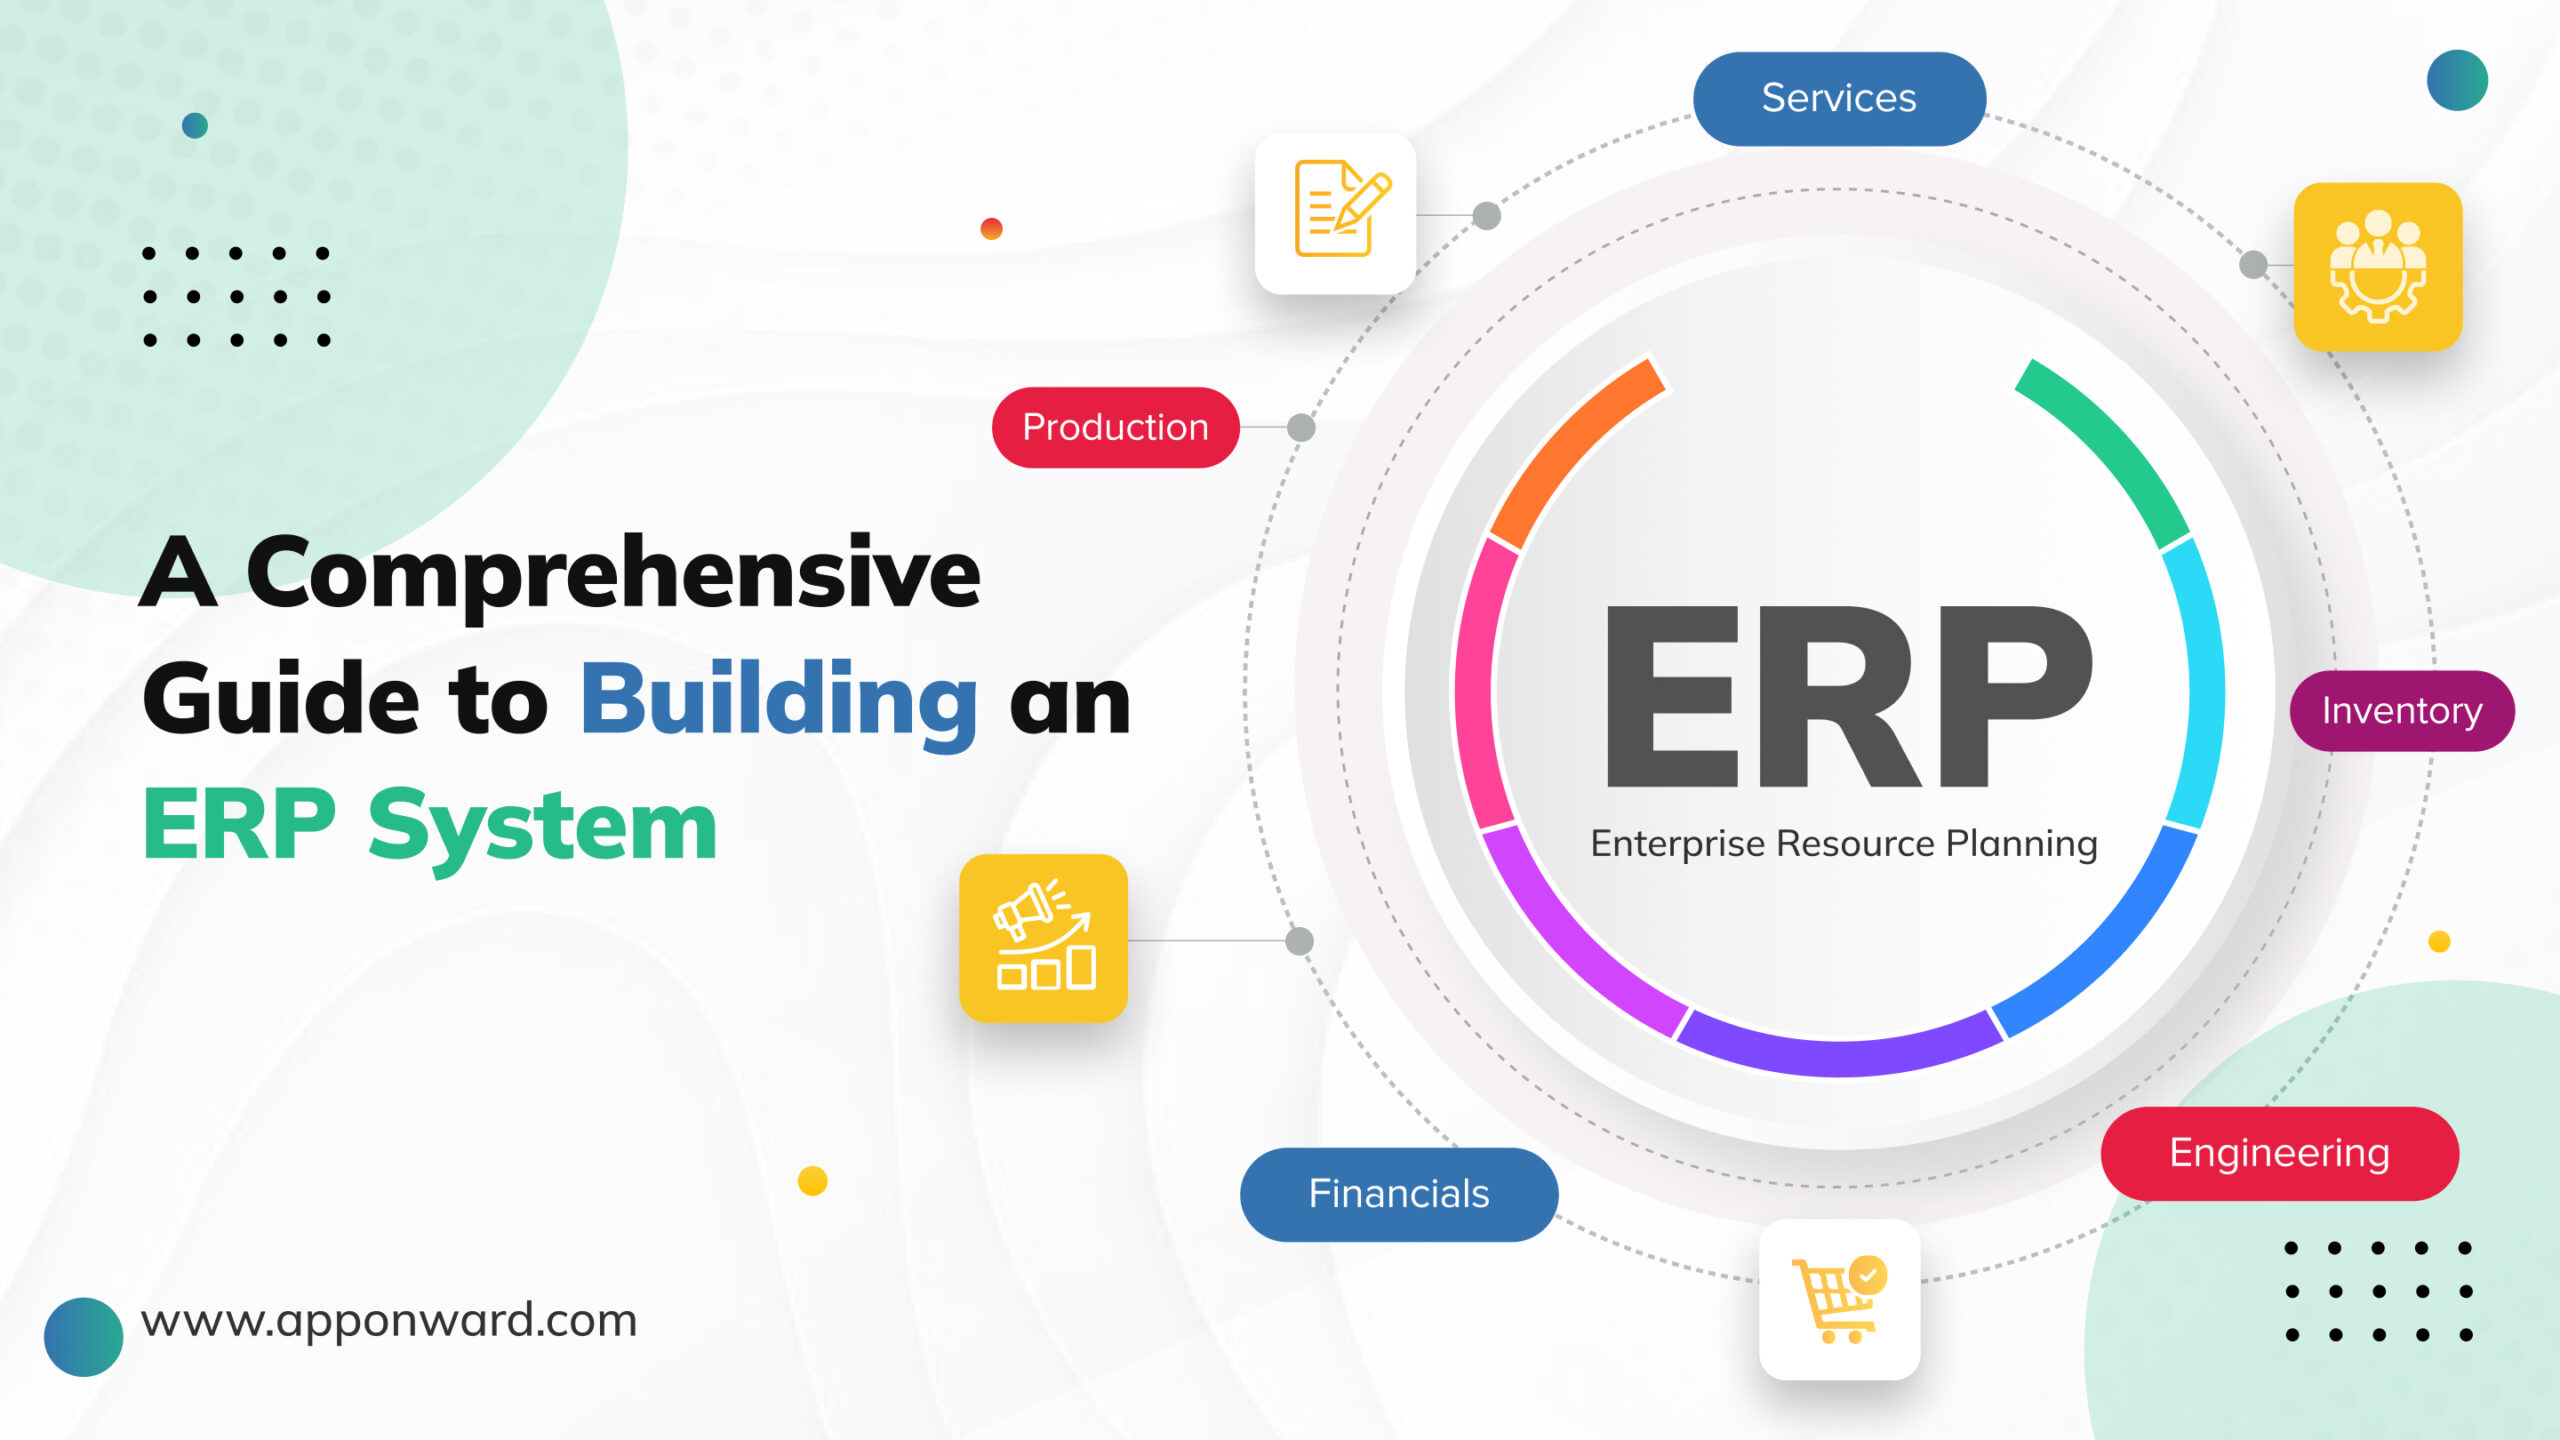 A Comprehensive Guide to Building an ERP System